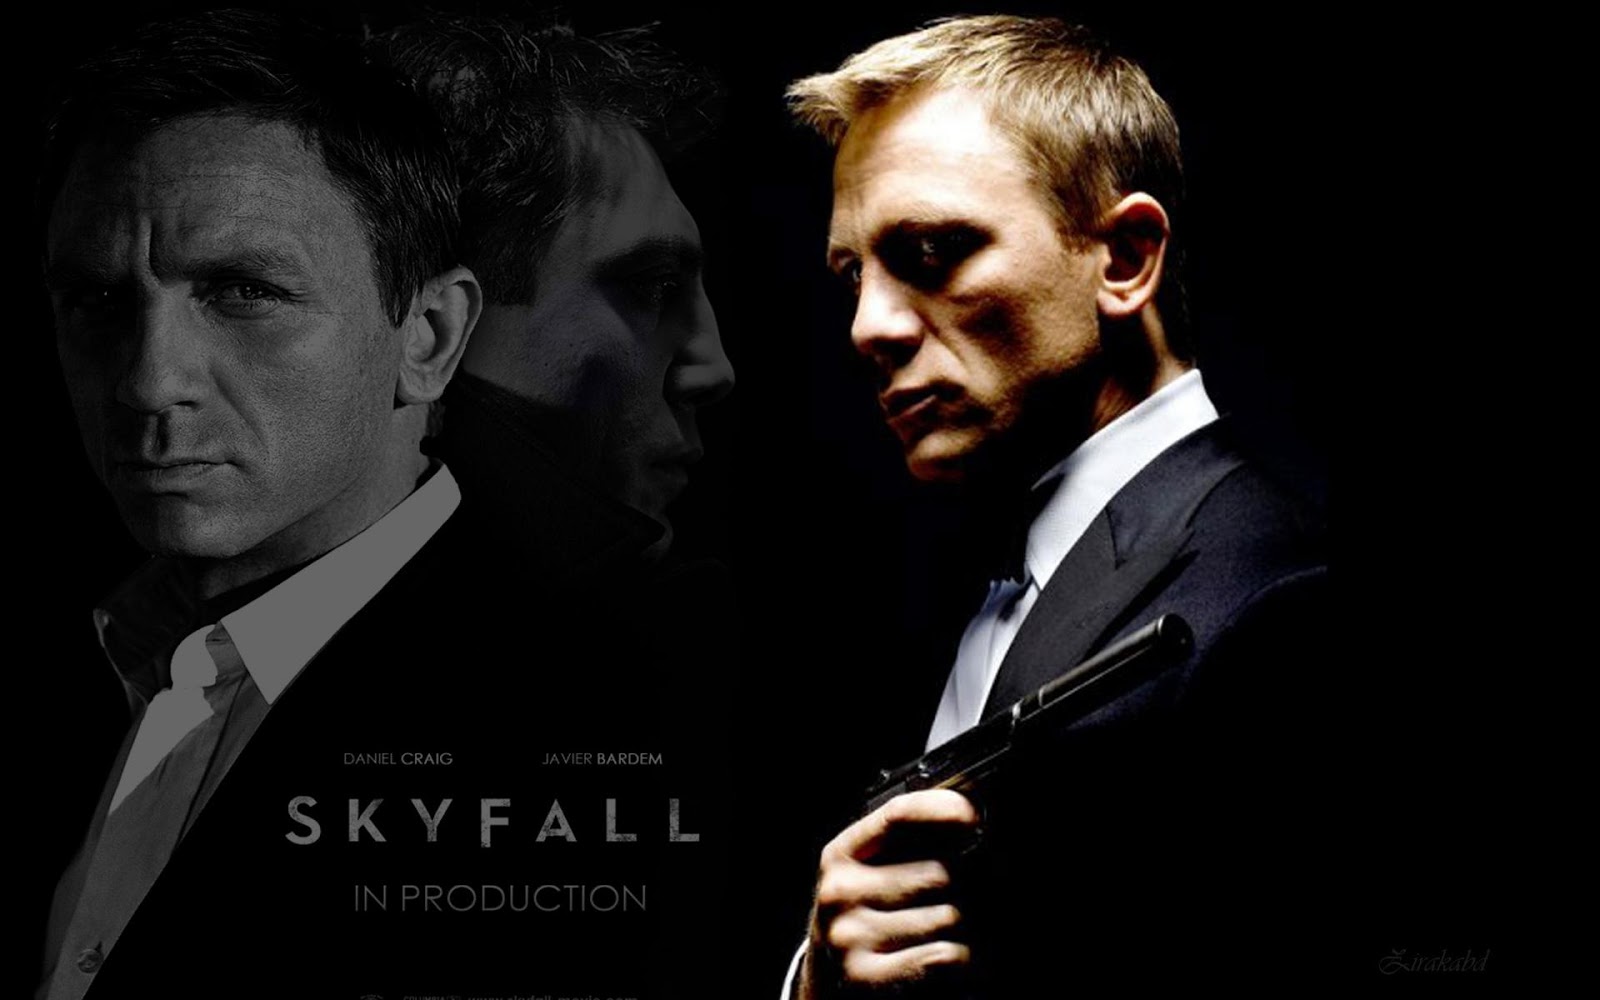 James Bond Skyfall HD Wallpaper Pc Android iPhone And iPad